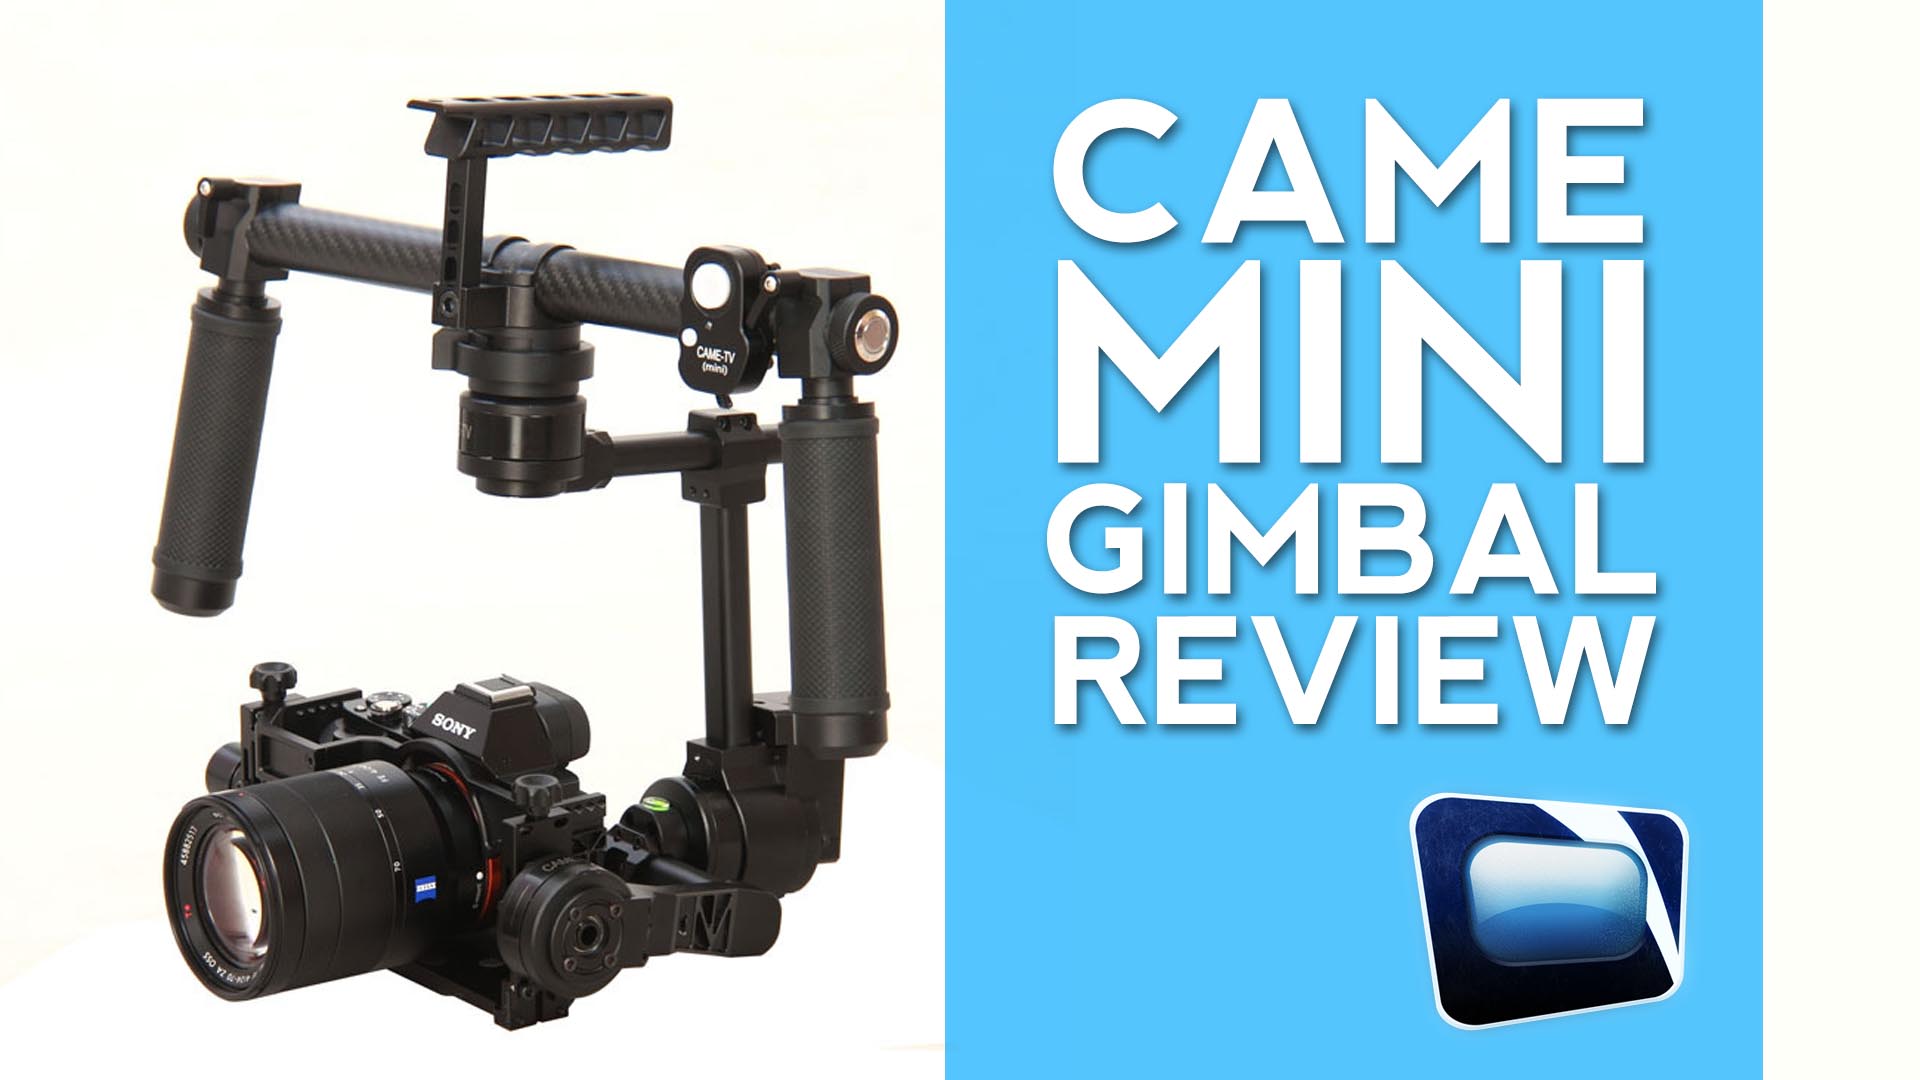 Gear Review: CAME-MINI 3-axis Gimbal for GH4, A7s, BMPCC (vs. DJI Ronin)